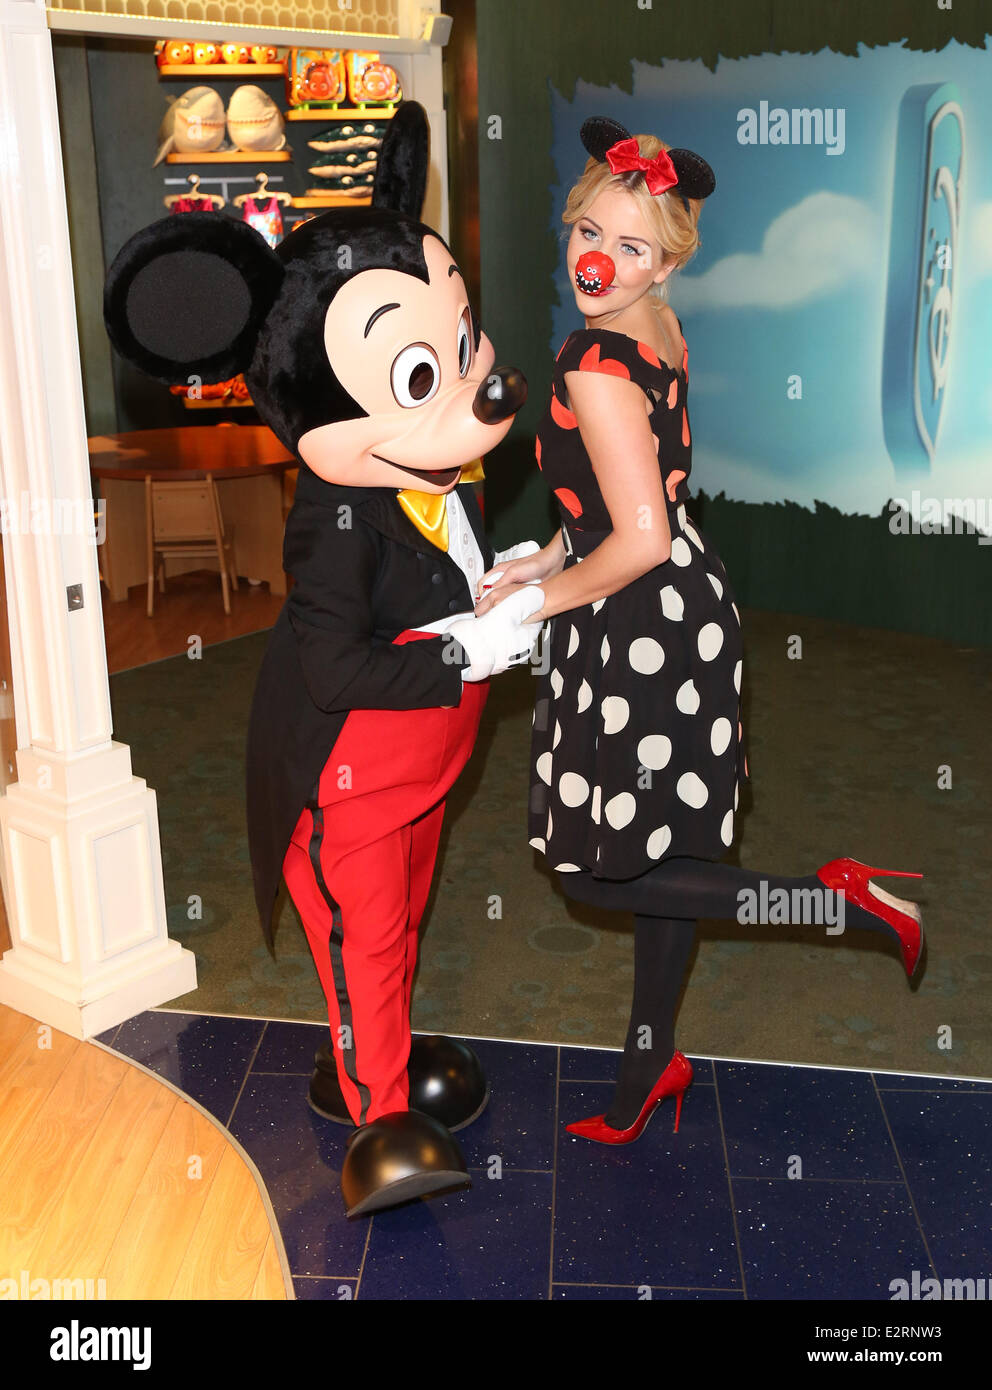 Volunt-ears with Mickey Mouse at Disney Store for Red Nose day Featuring:  Lydia Bright aka Lydia Rose Bright Where: London, United Kingdom When: 14  Feb 2013 Stock Photo - Alamy